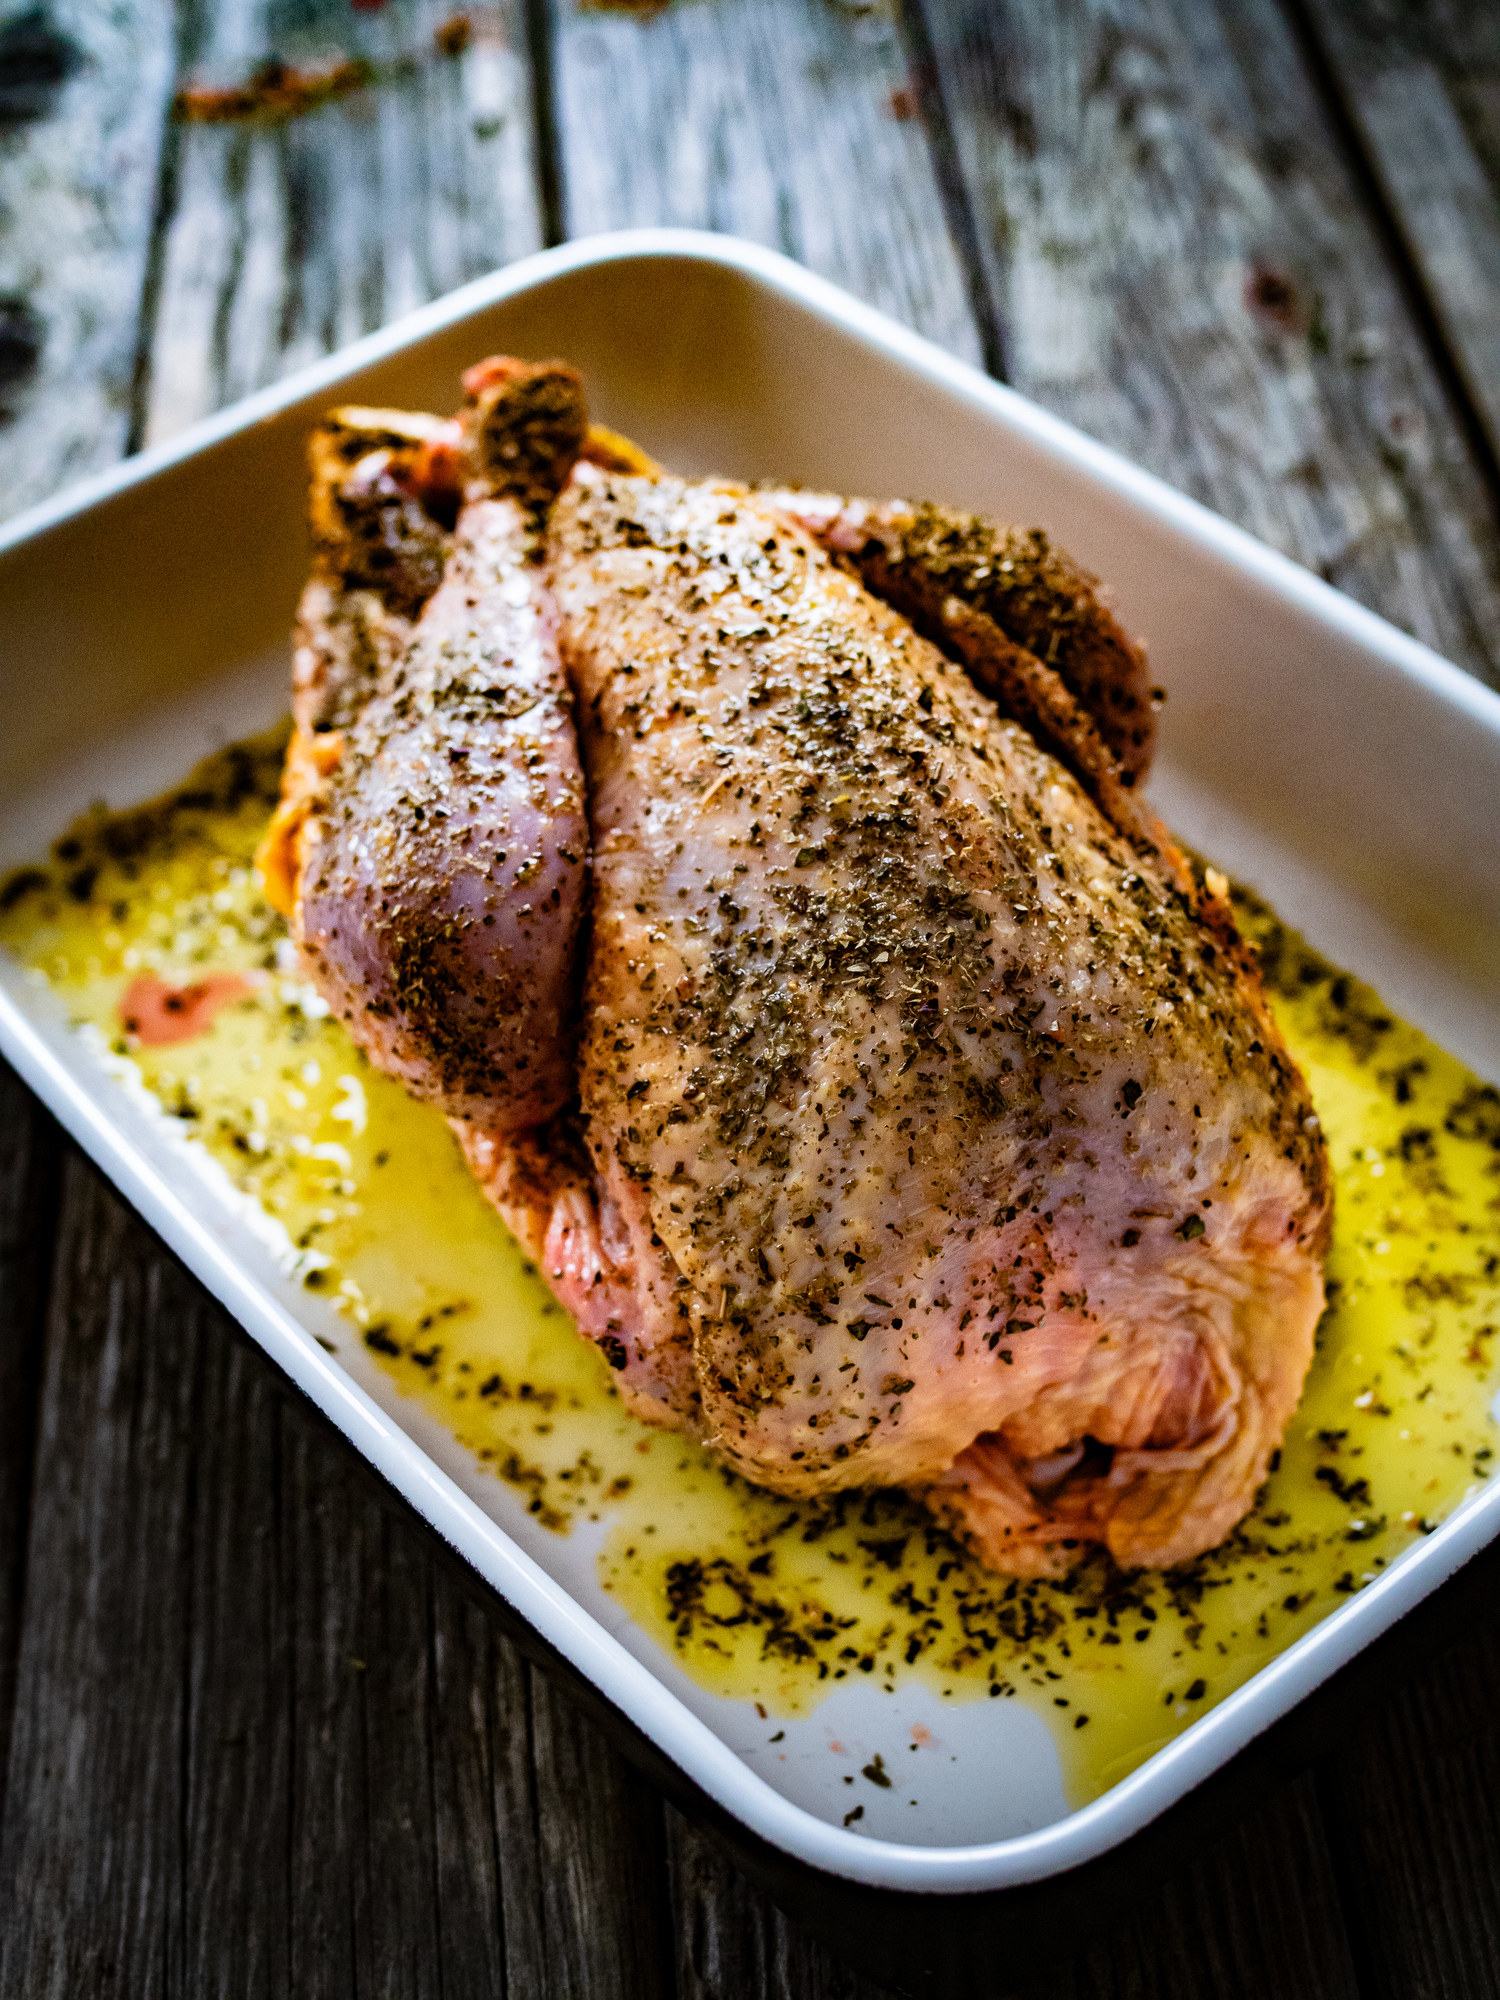 Raw whole chicken rubbed with spices in cooking pan on wooden table